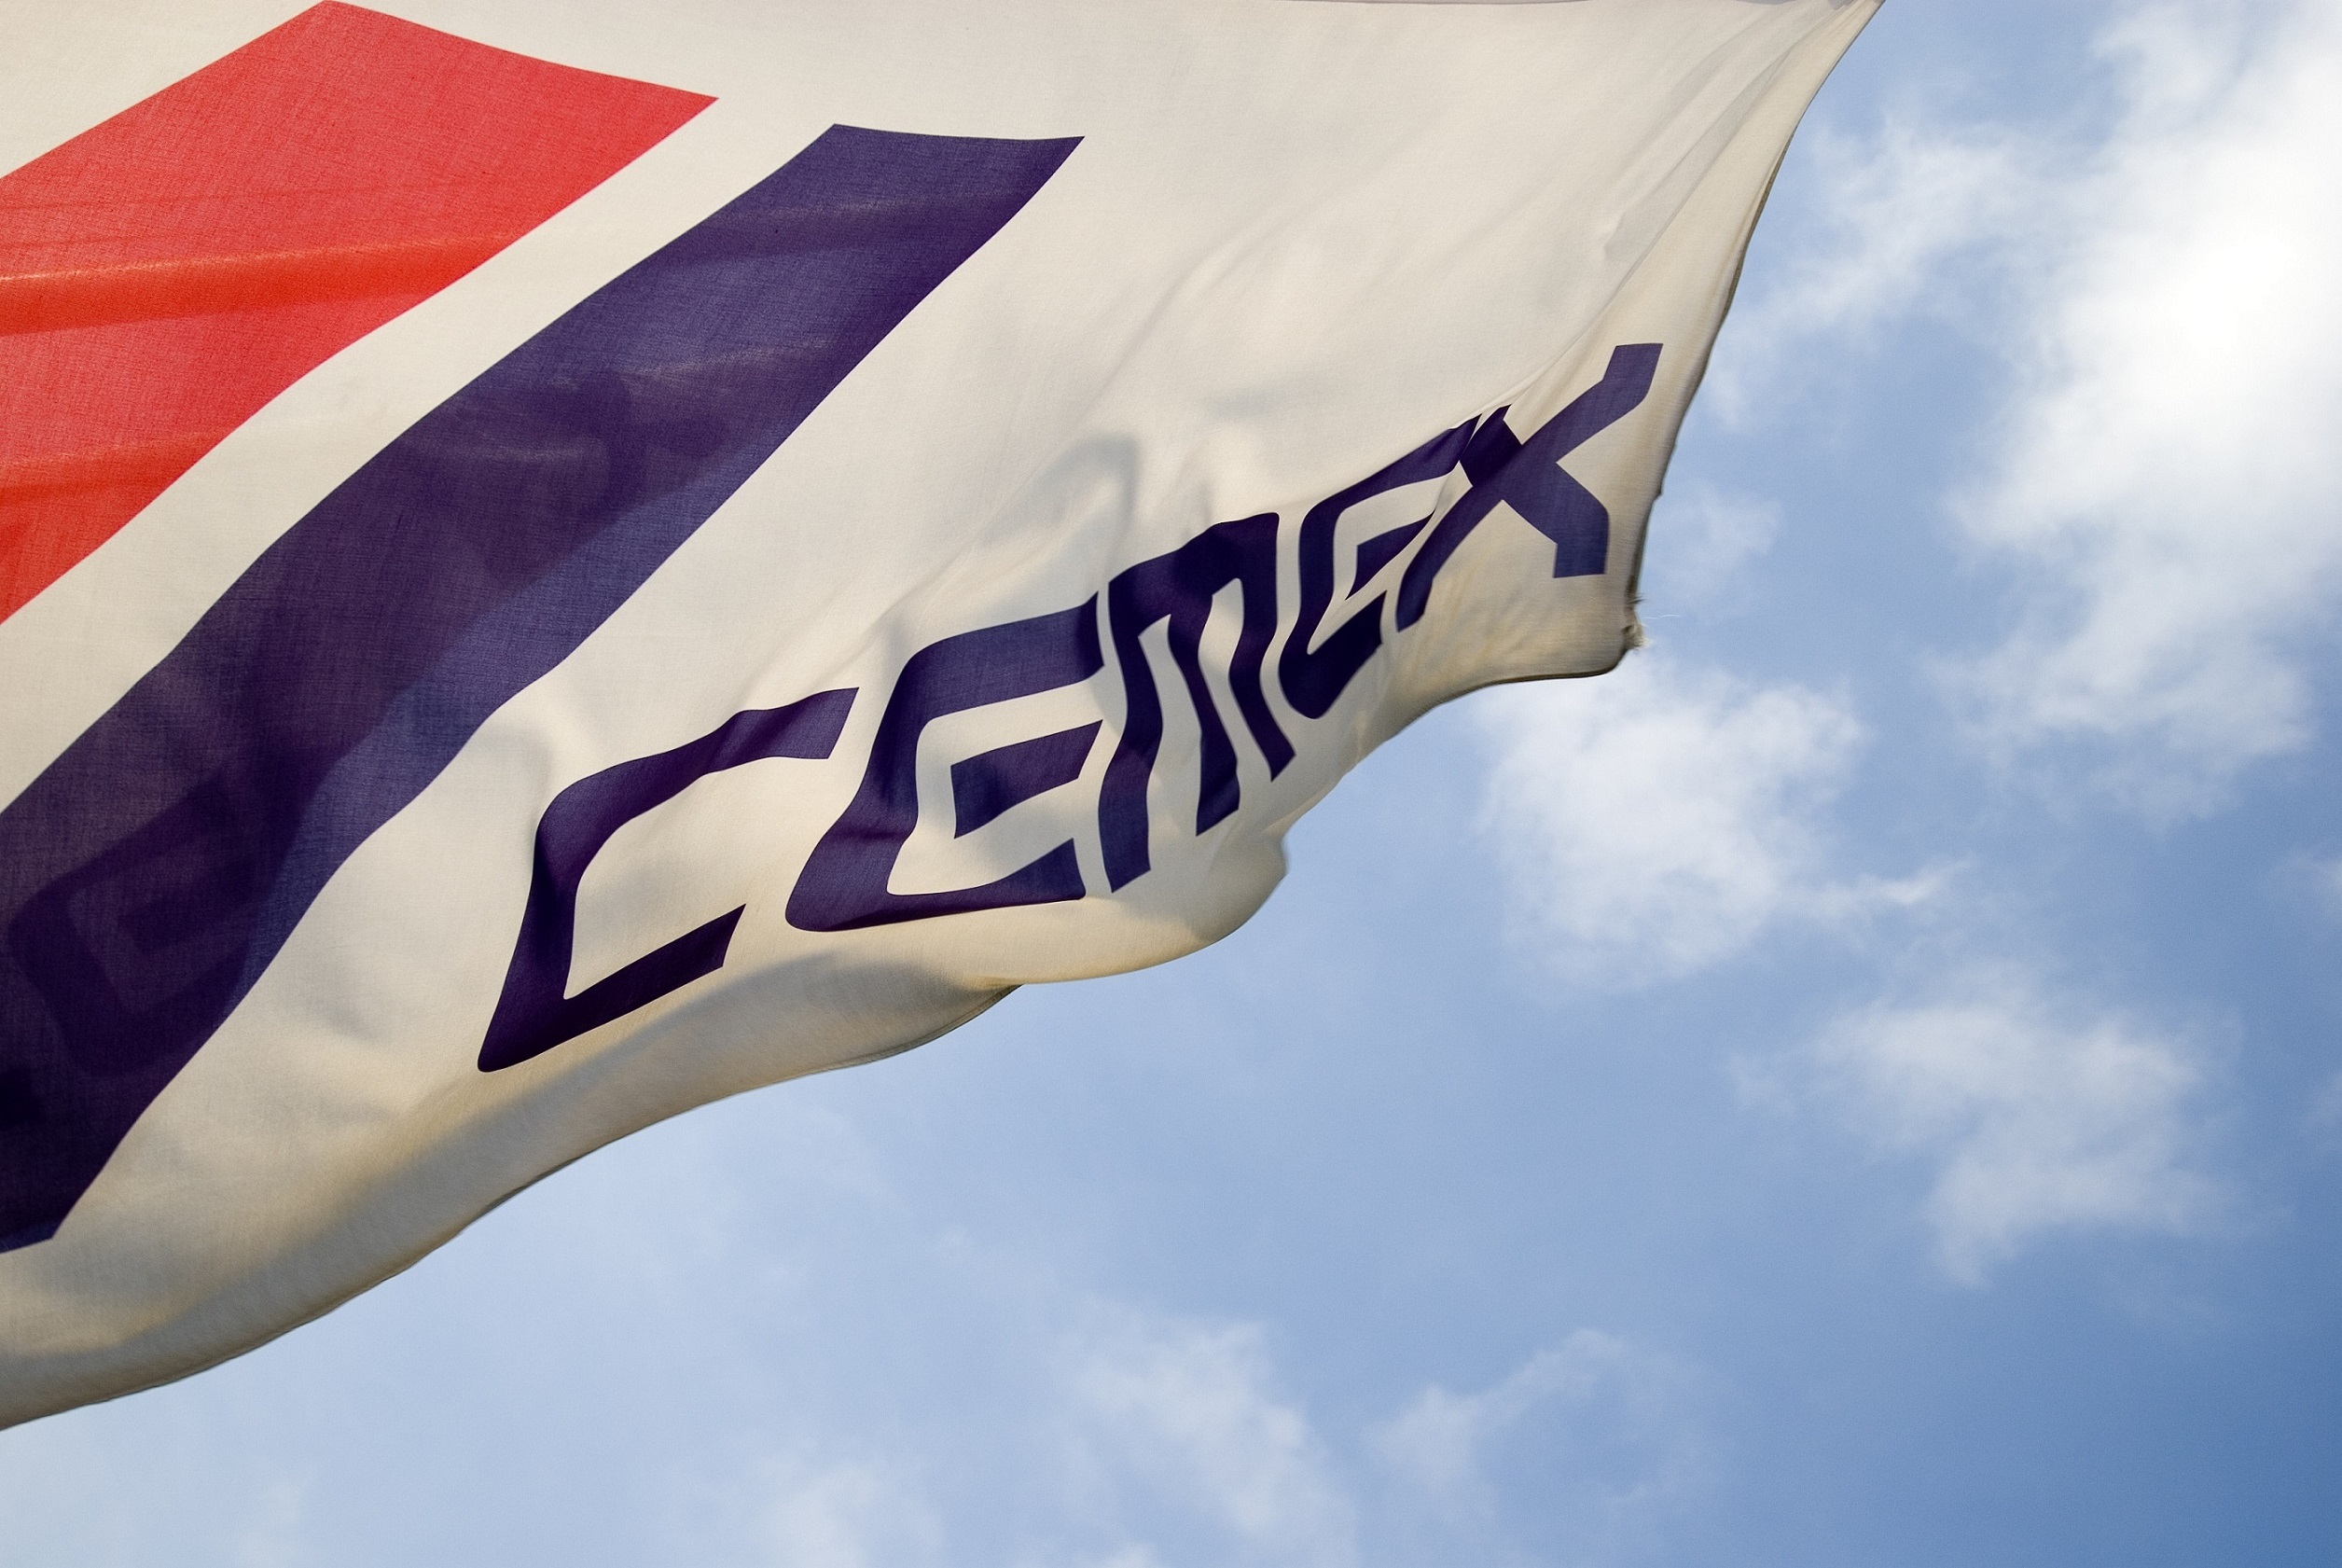 CEMEX says its new admixtures cut carbon emissions and promote more sustainable construction practices